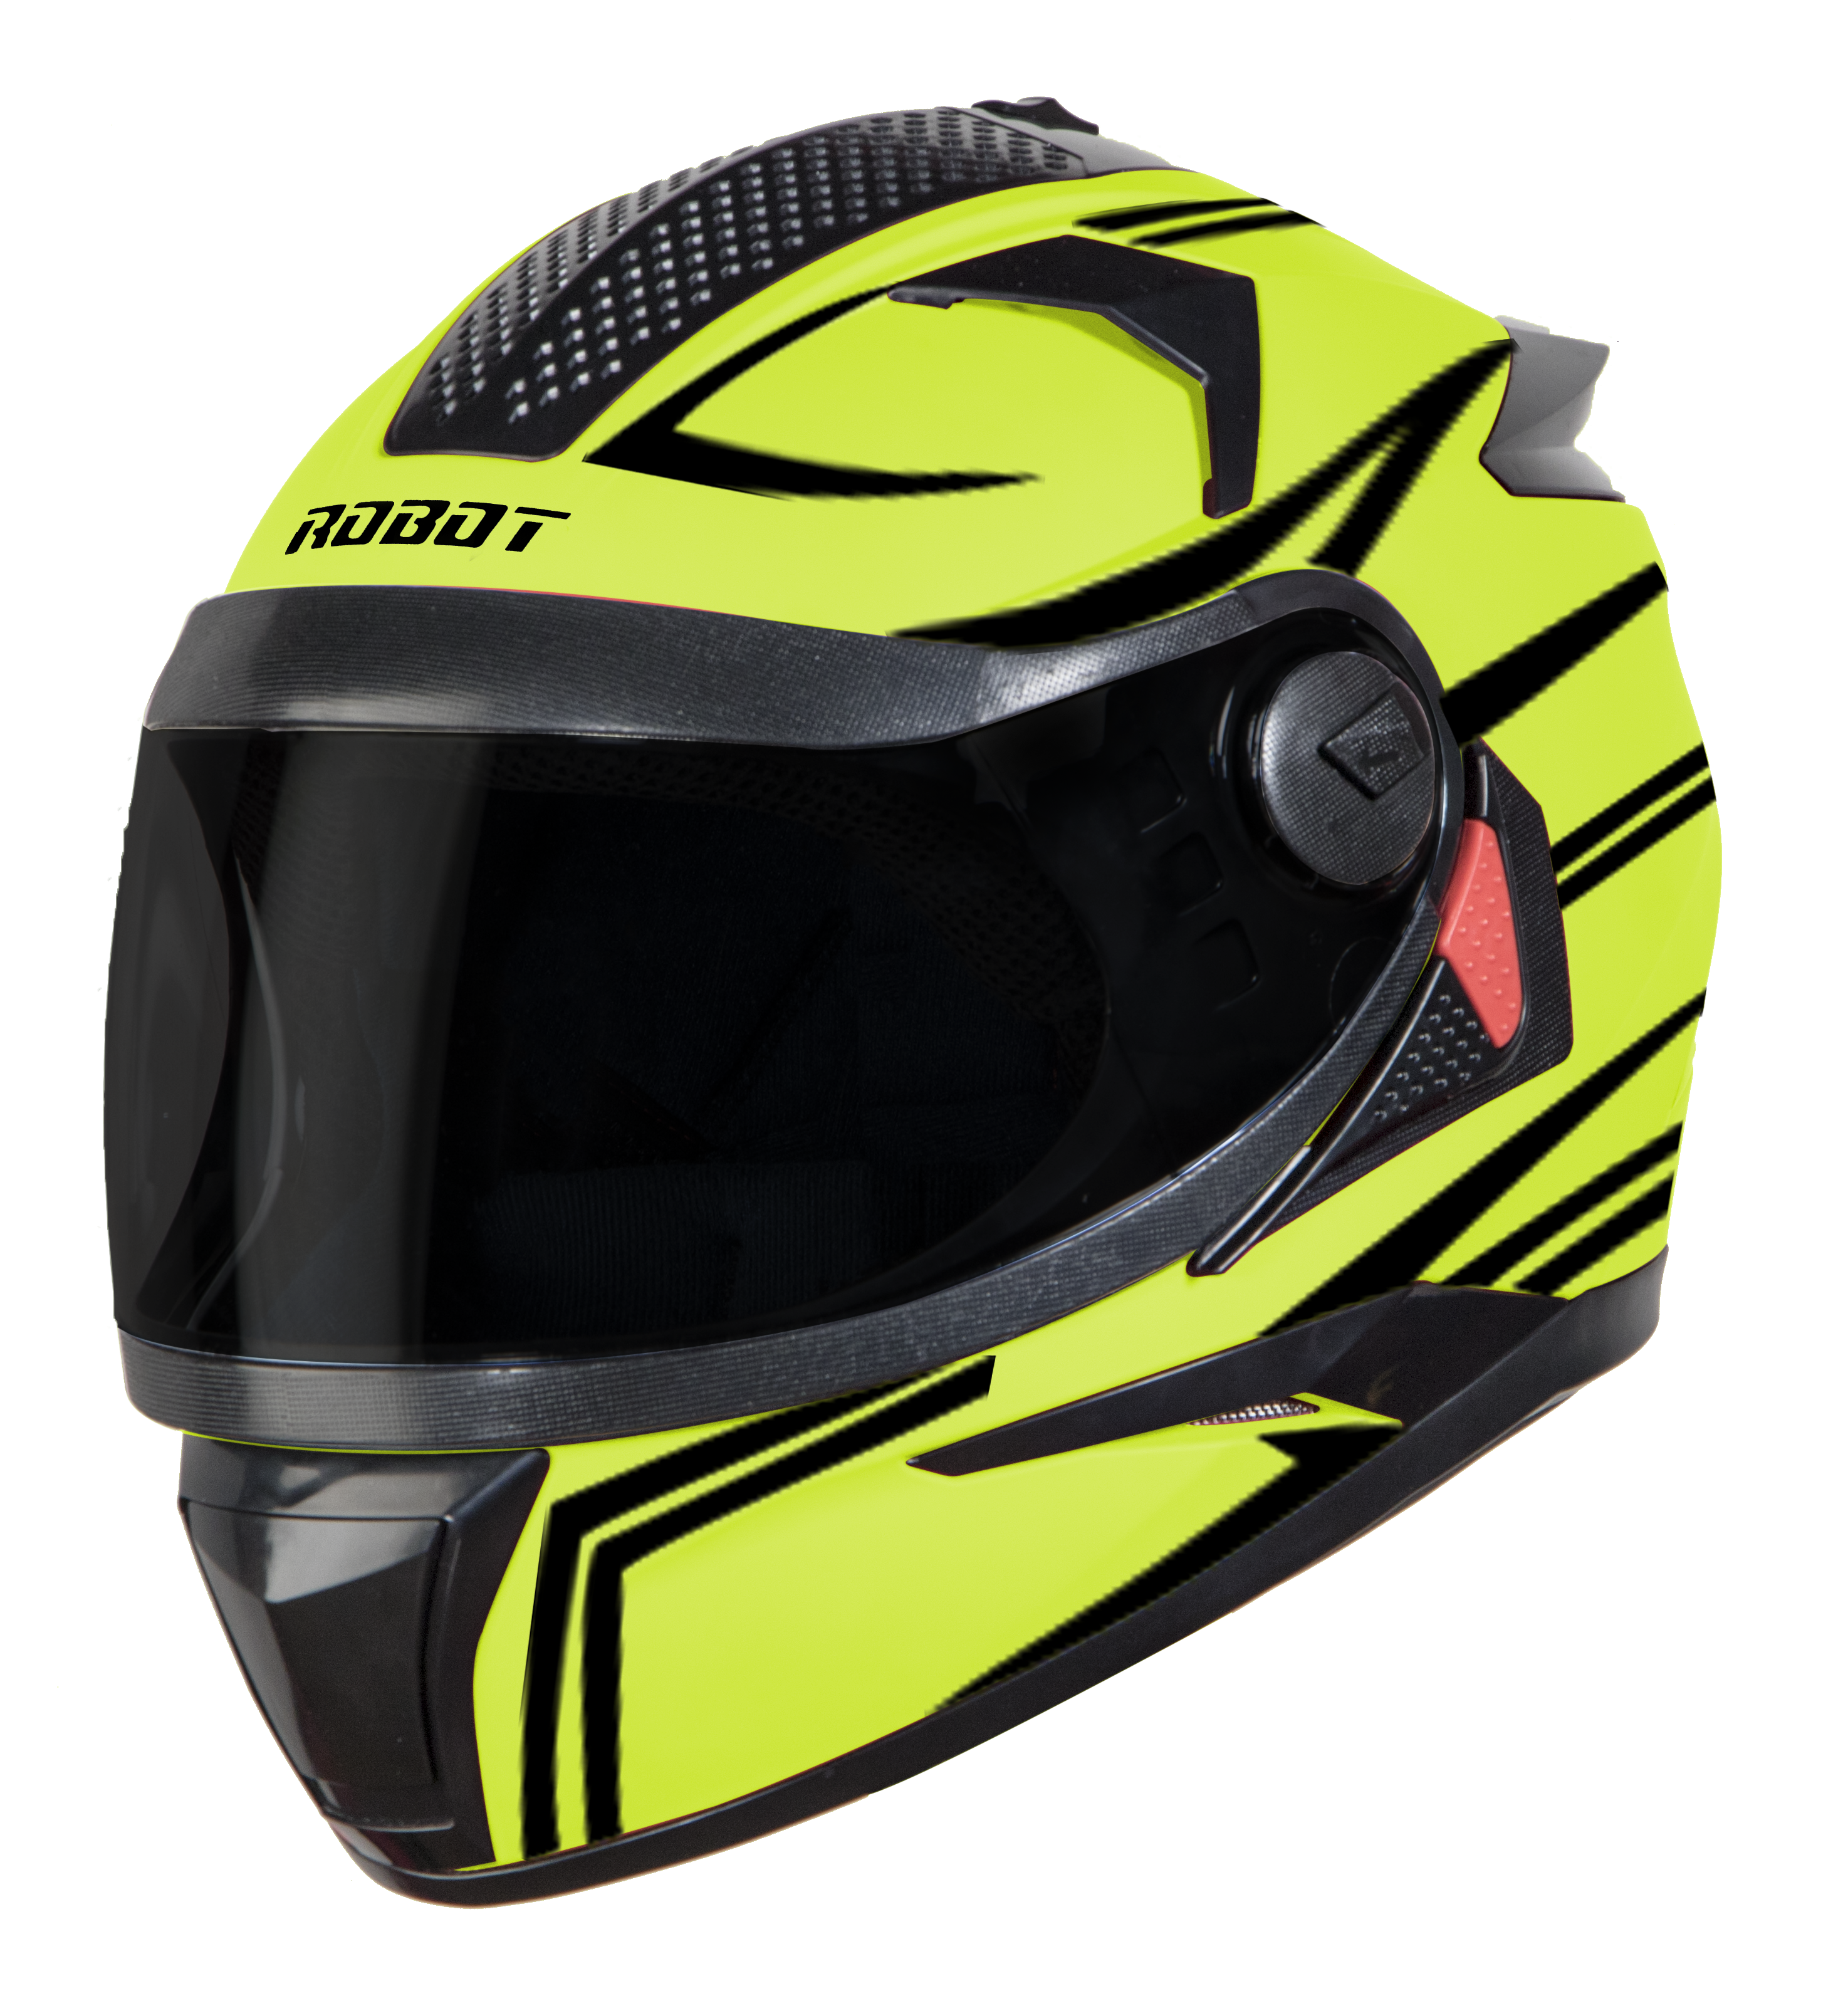 SBH-17 ROBOT REFLECTIVE GLOSSY FLUO NEON (FITTED WITH CLEAR VISOR EXTRA SMOKE VISOR FREE)